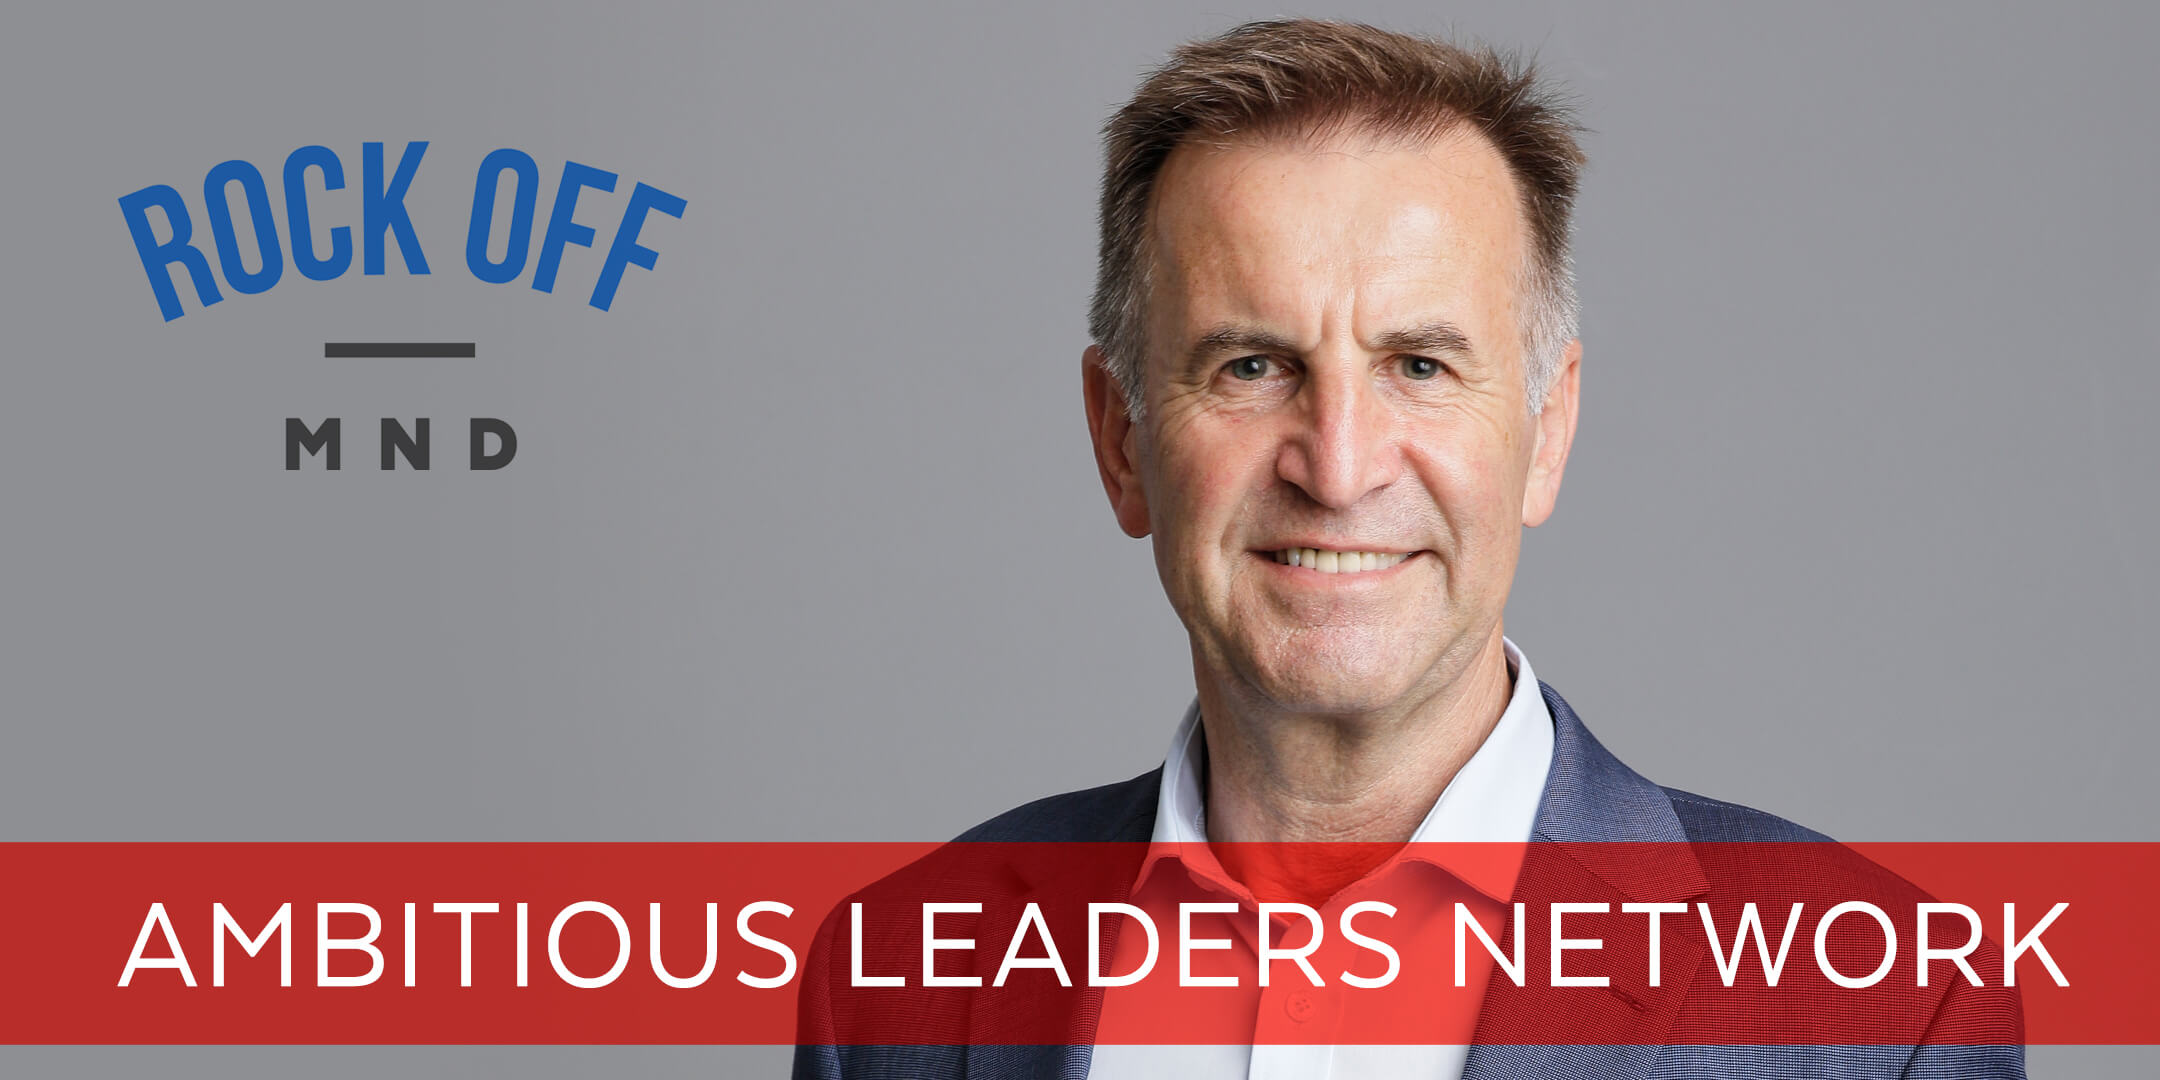 Peter - Speaker At The Ambitious Leaders Network